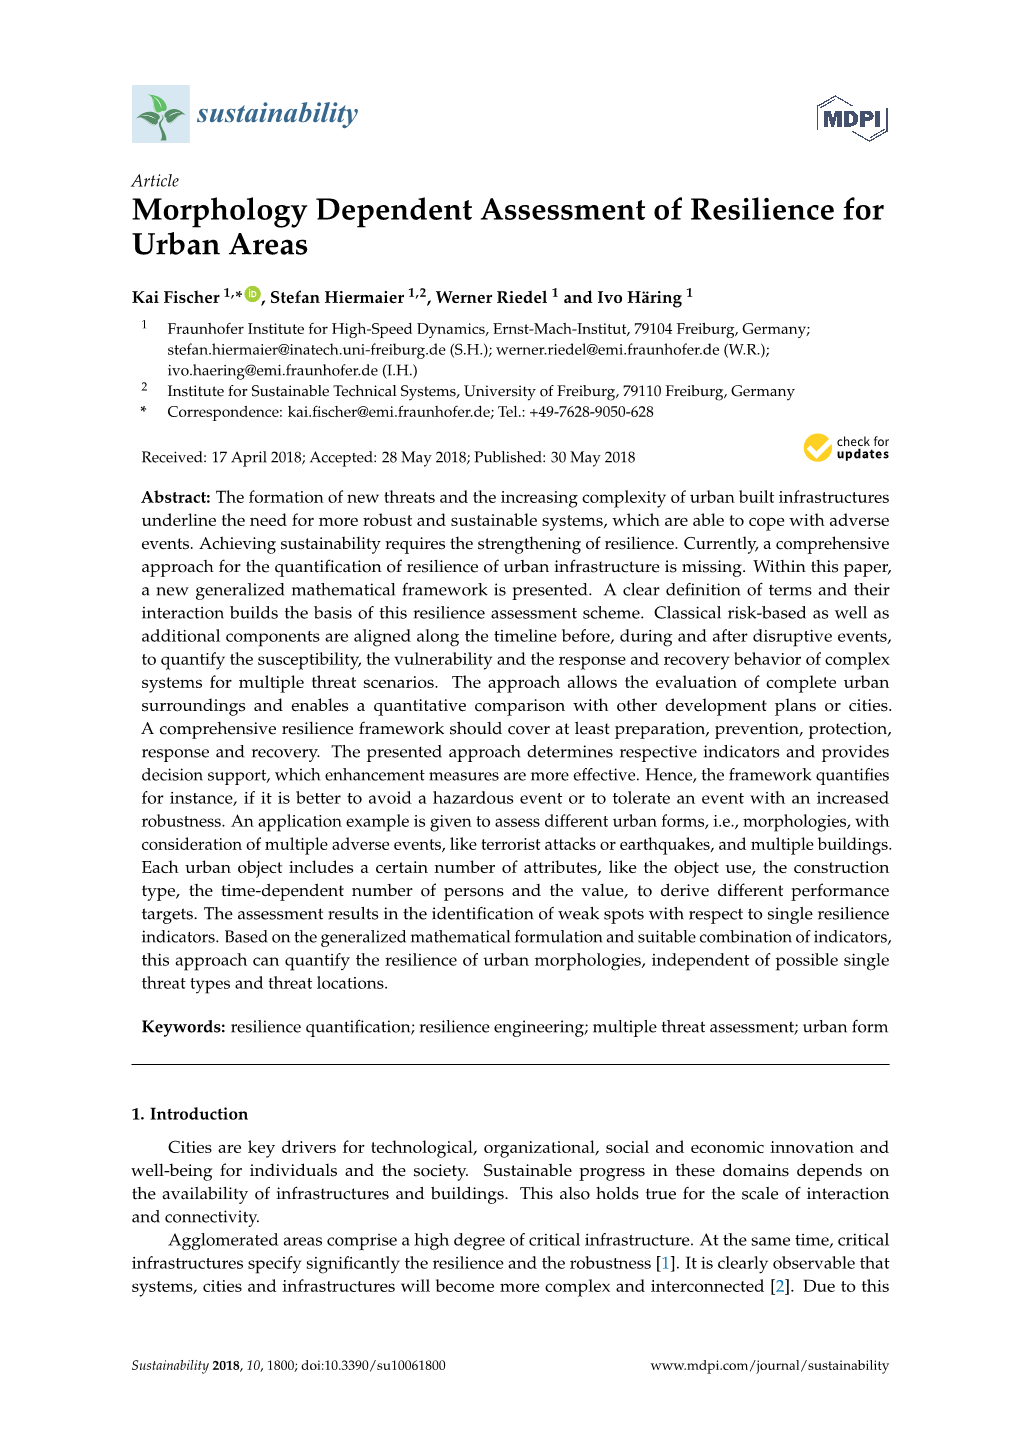 Morphology Dependent Assessment of Resilience for Urban Areas